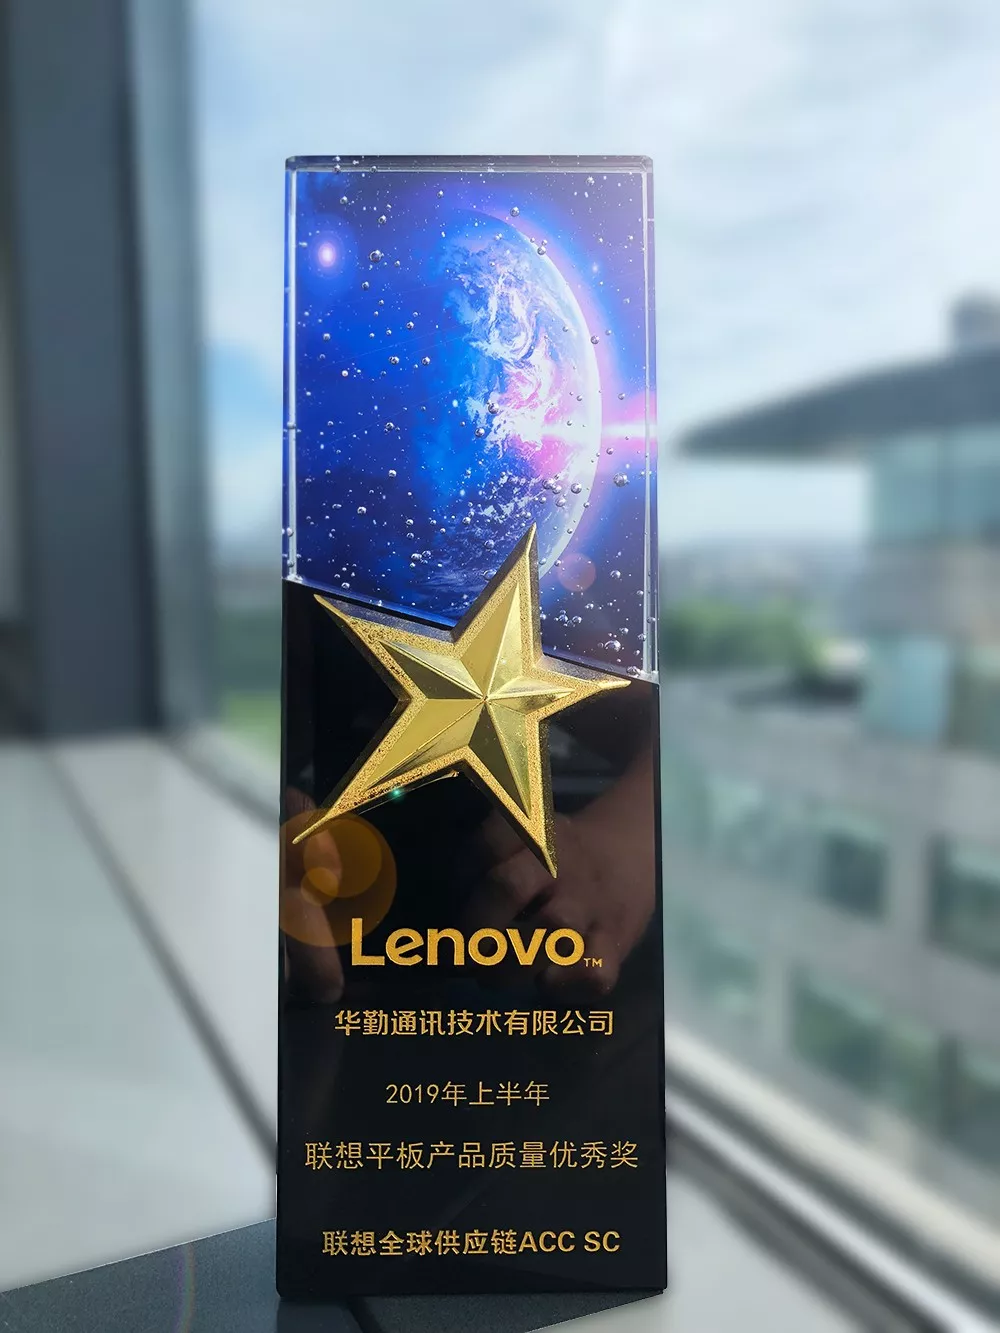 Huaqin Received "Lenovo Quality Excellence Award for Tablet Product"